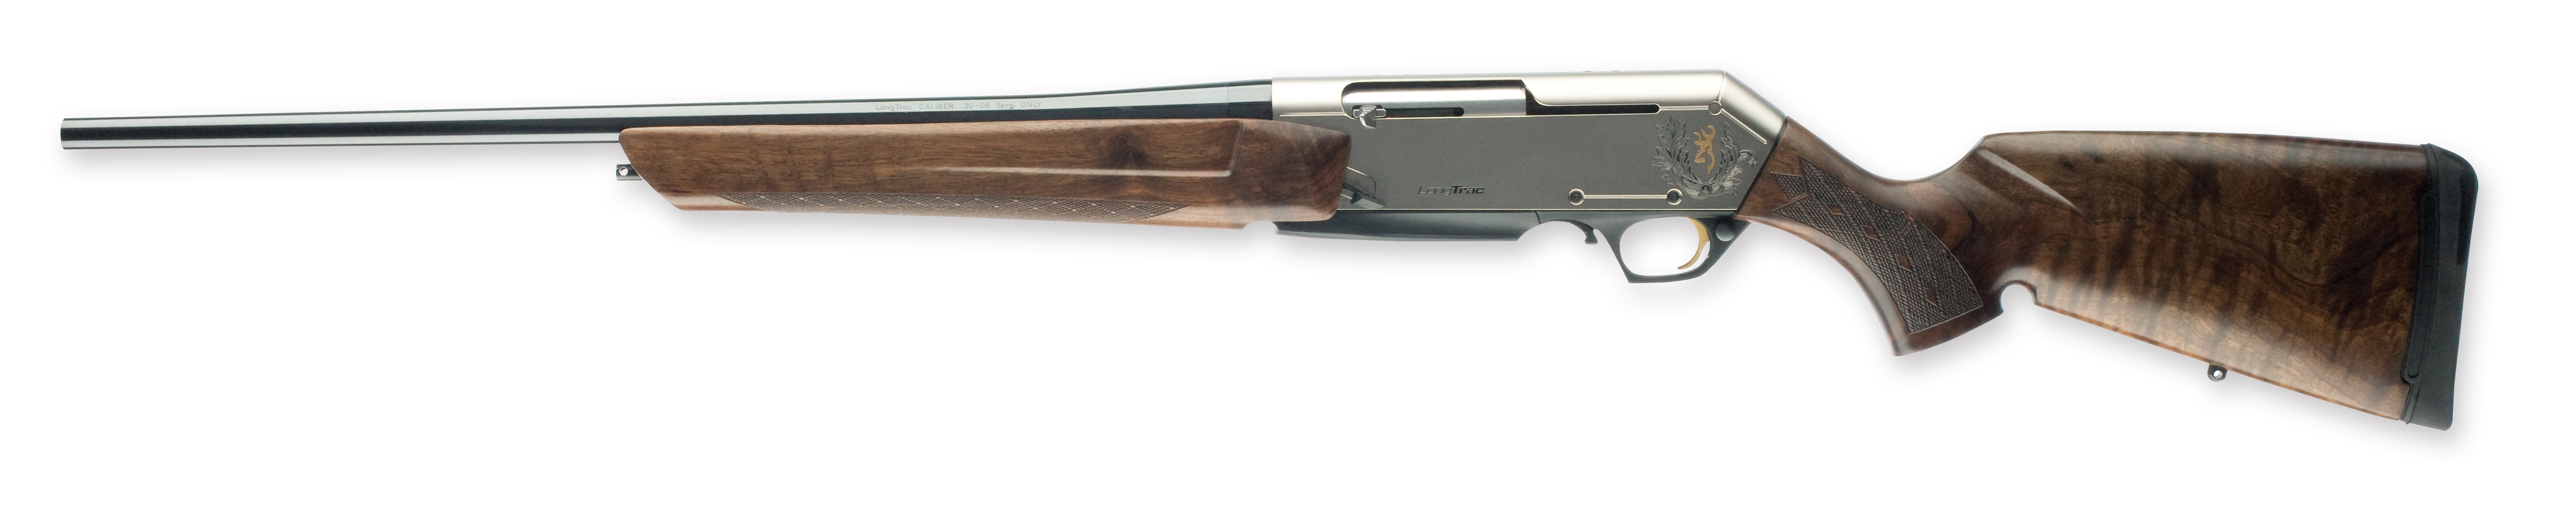 Browning BAR LongTrac LH Oil Finish